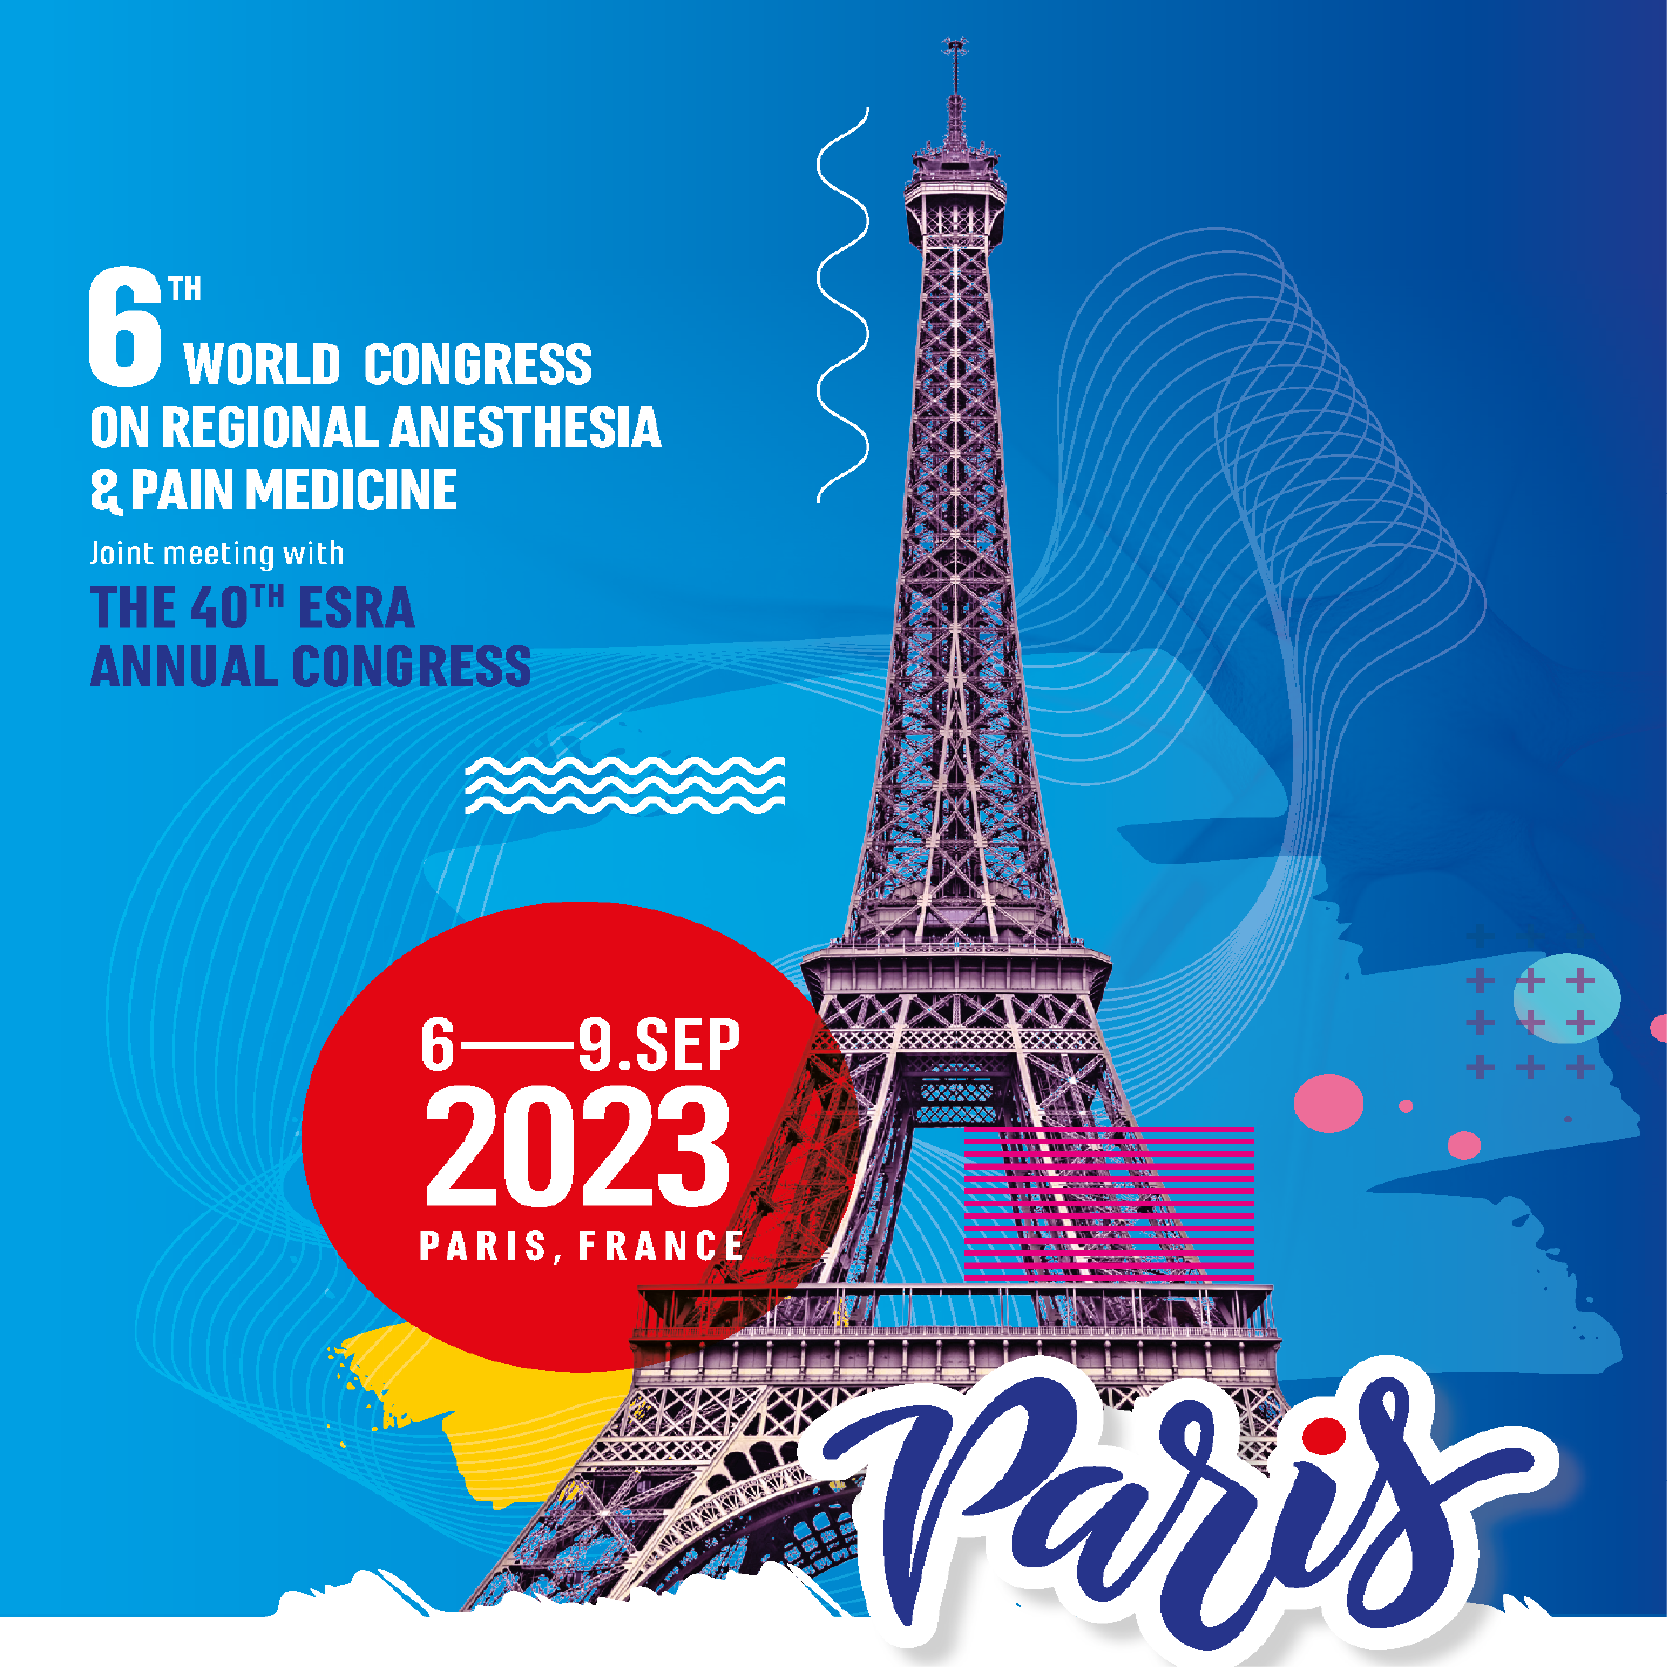 The 6th World Congress on Regional Anaesthesia and Pain Medicine - ESRA 2023